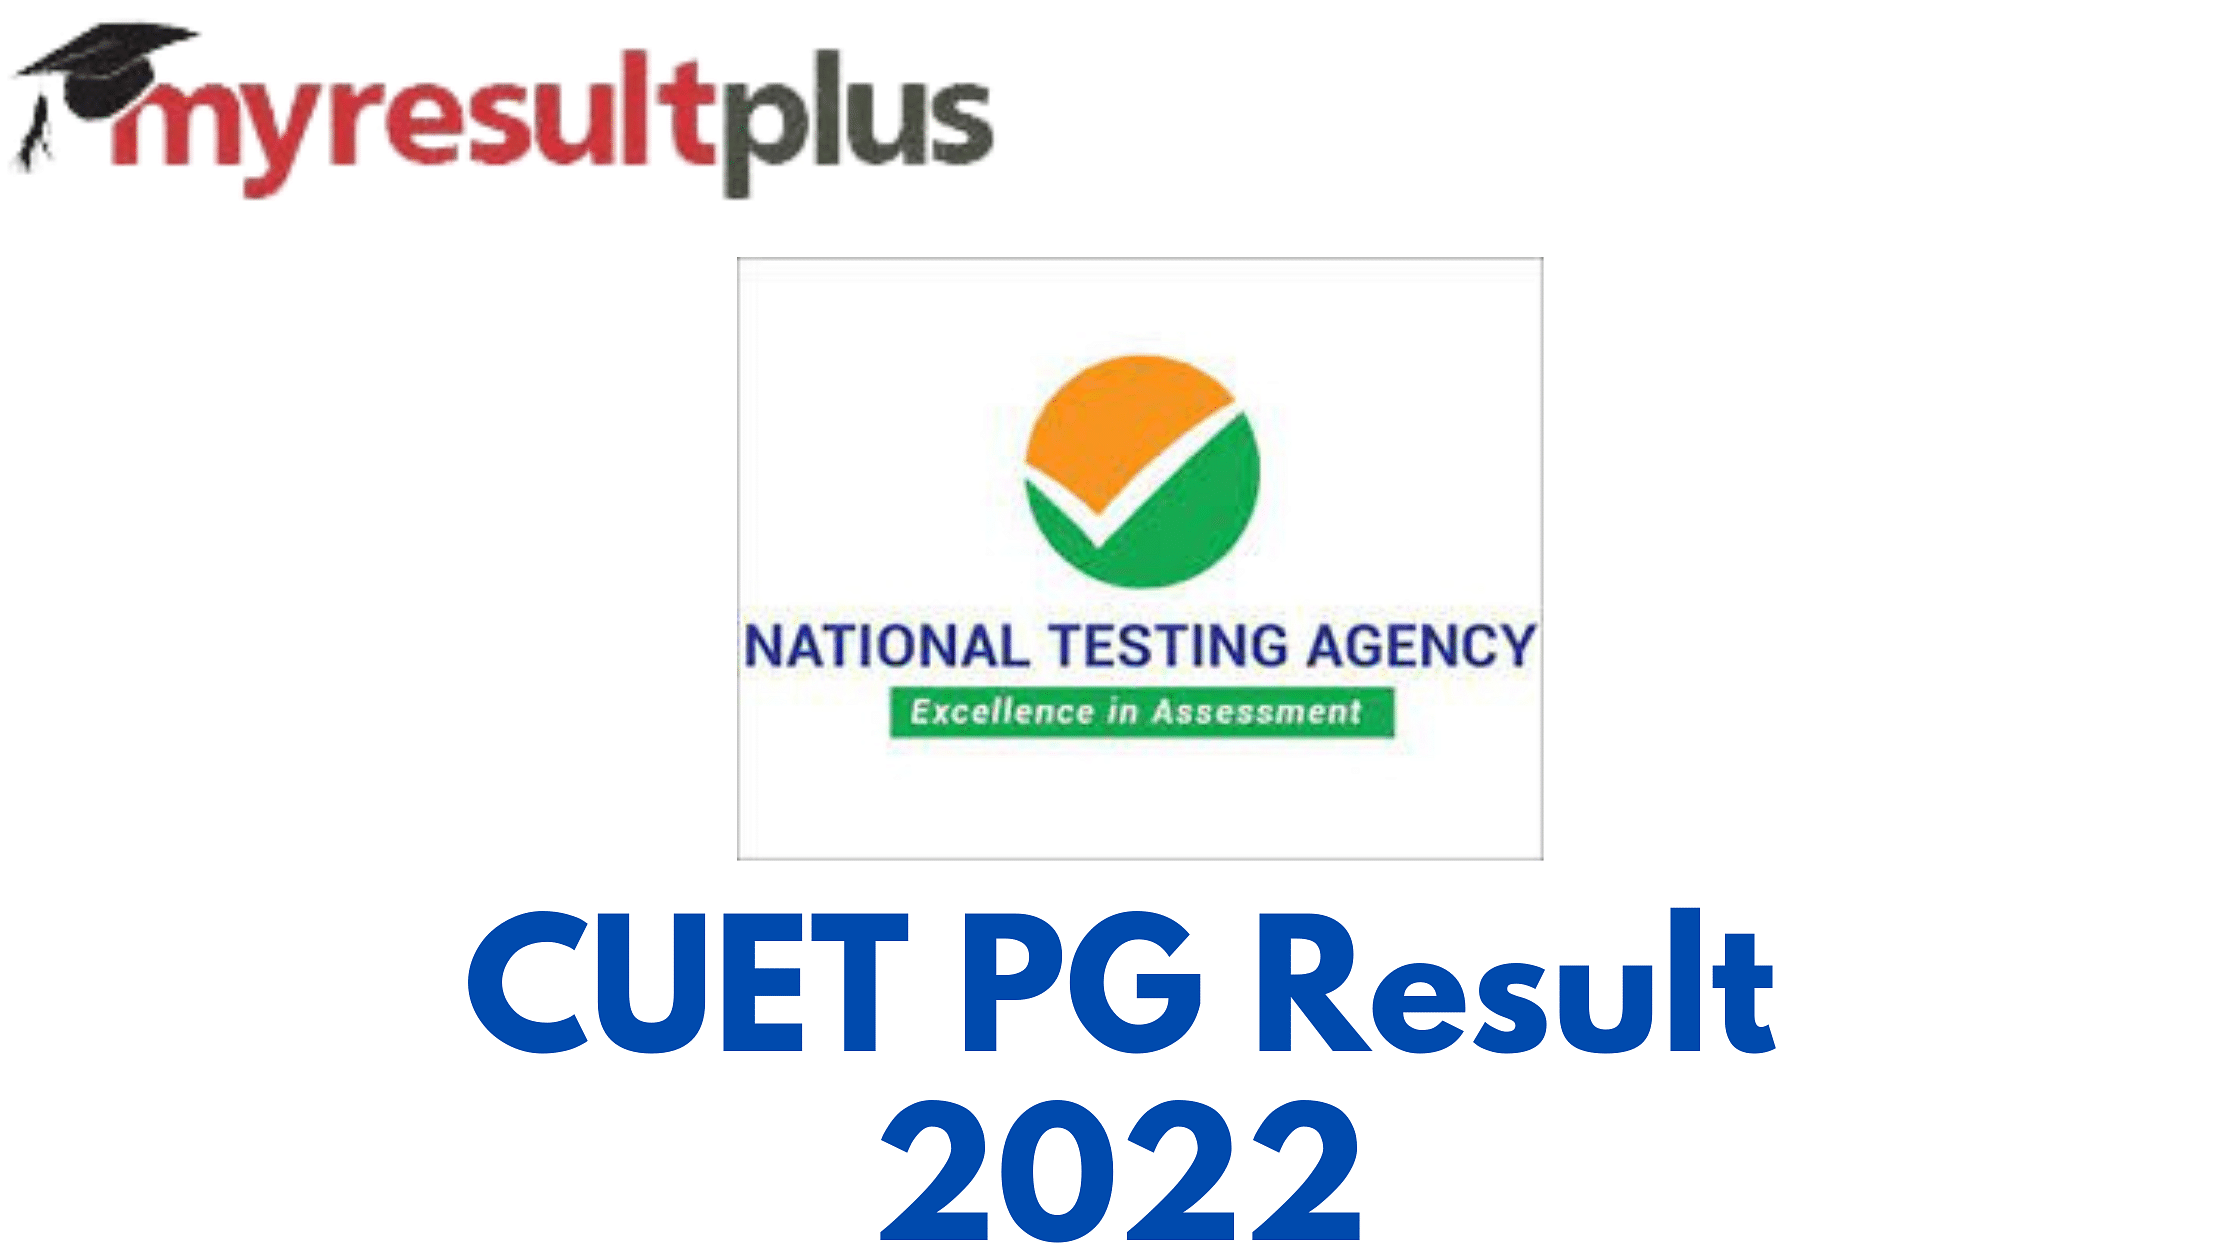 CUET PG Result 2022 Released, Know How to Check Here